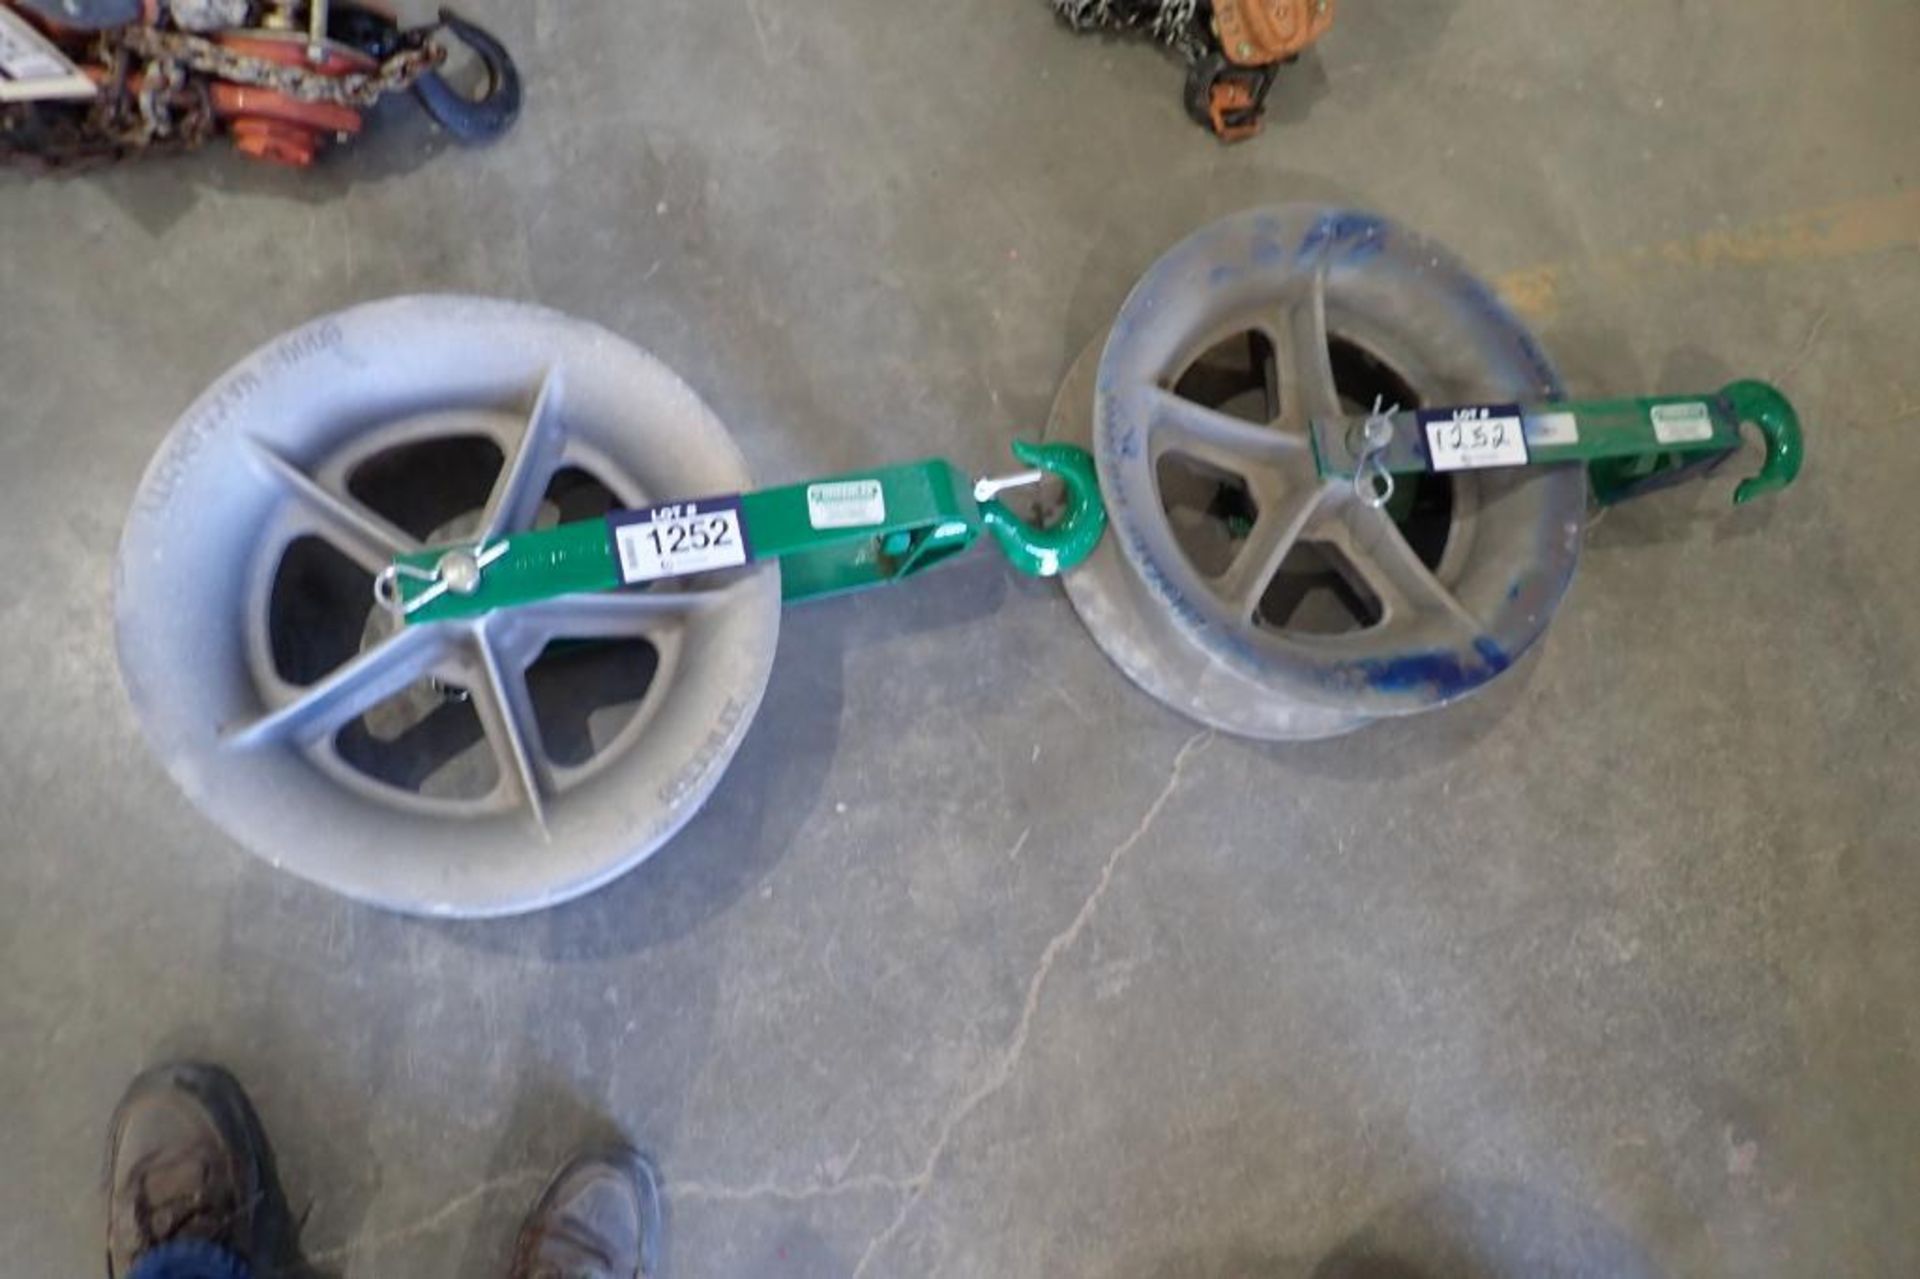 Lot of 2 Greenlee 8,000lbs Capacity Cable Reels.